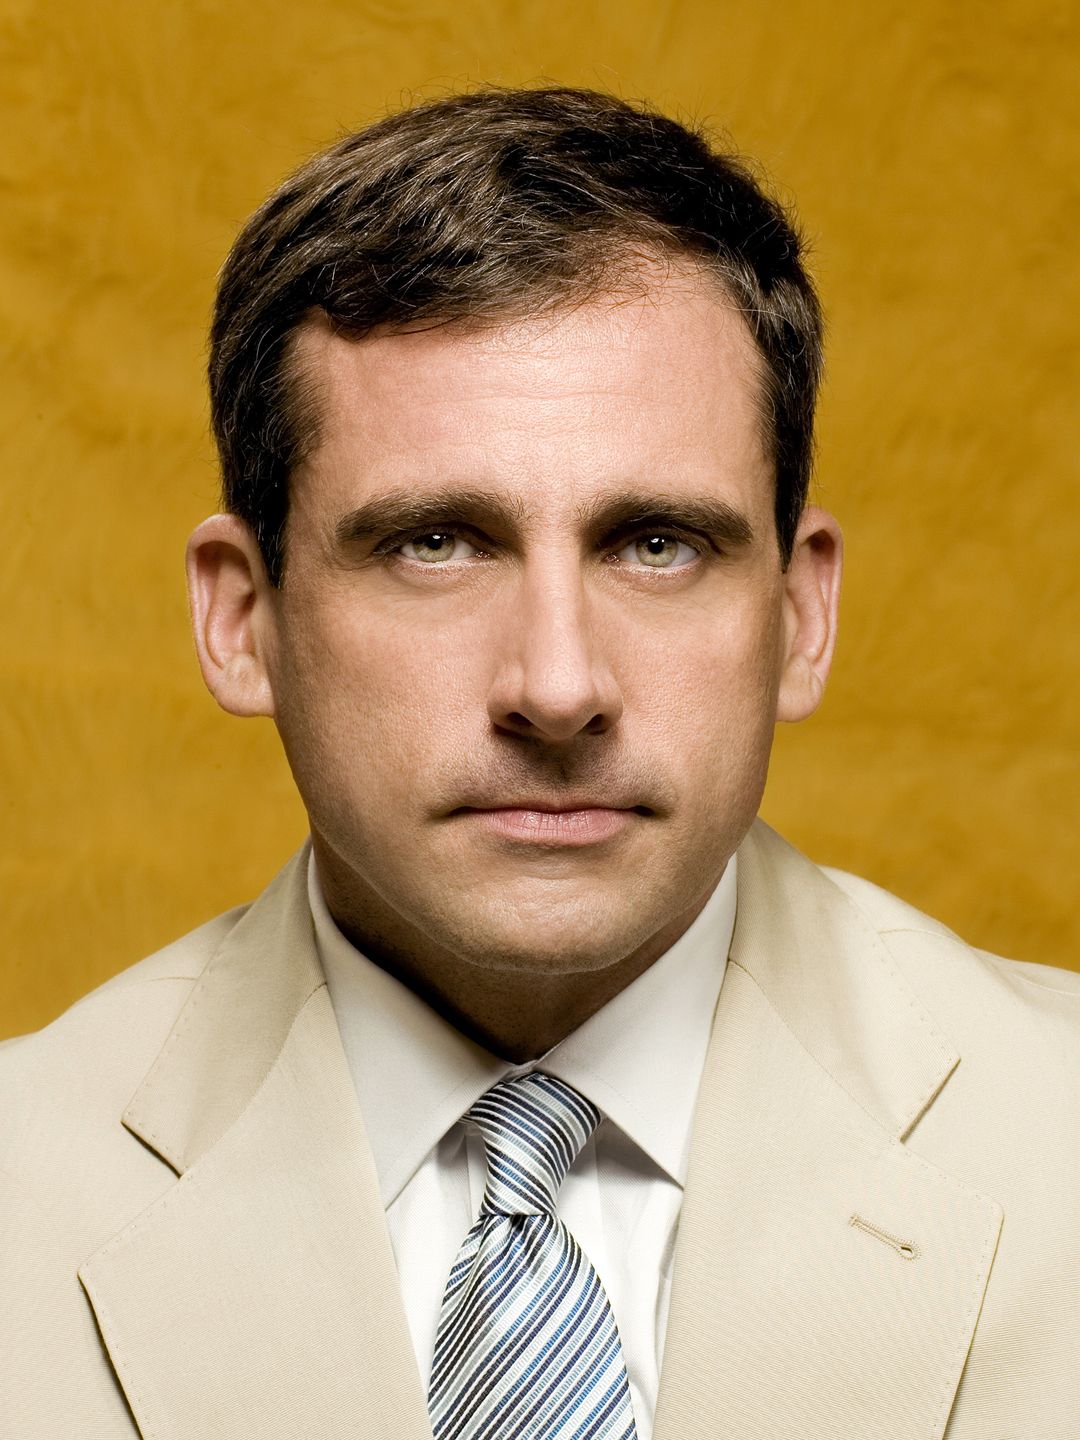 Steve Carell who are his parents